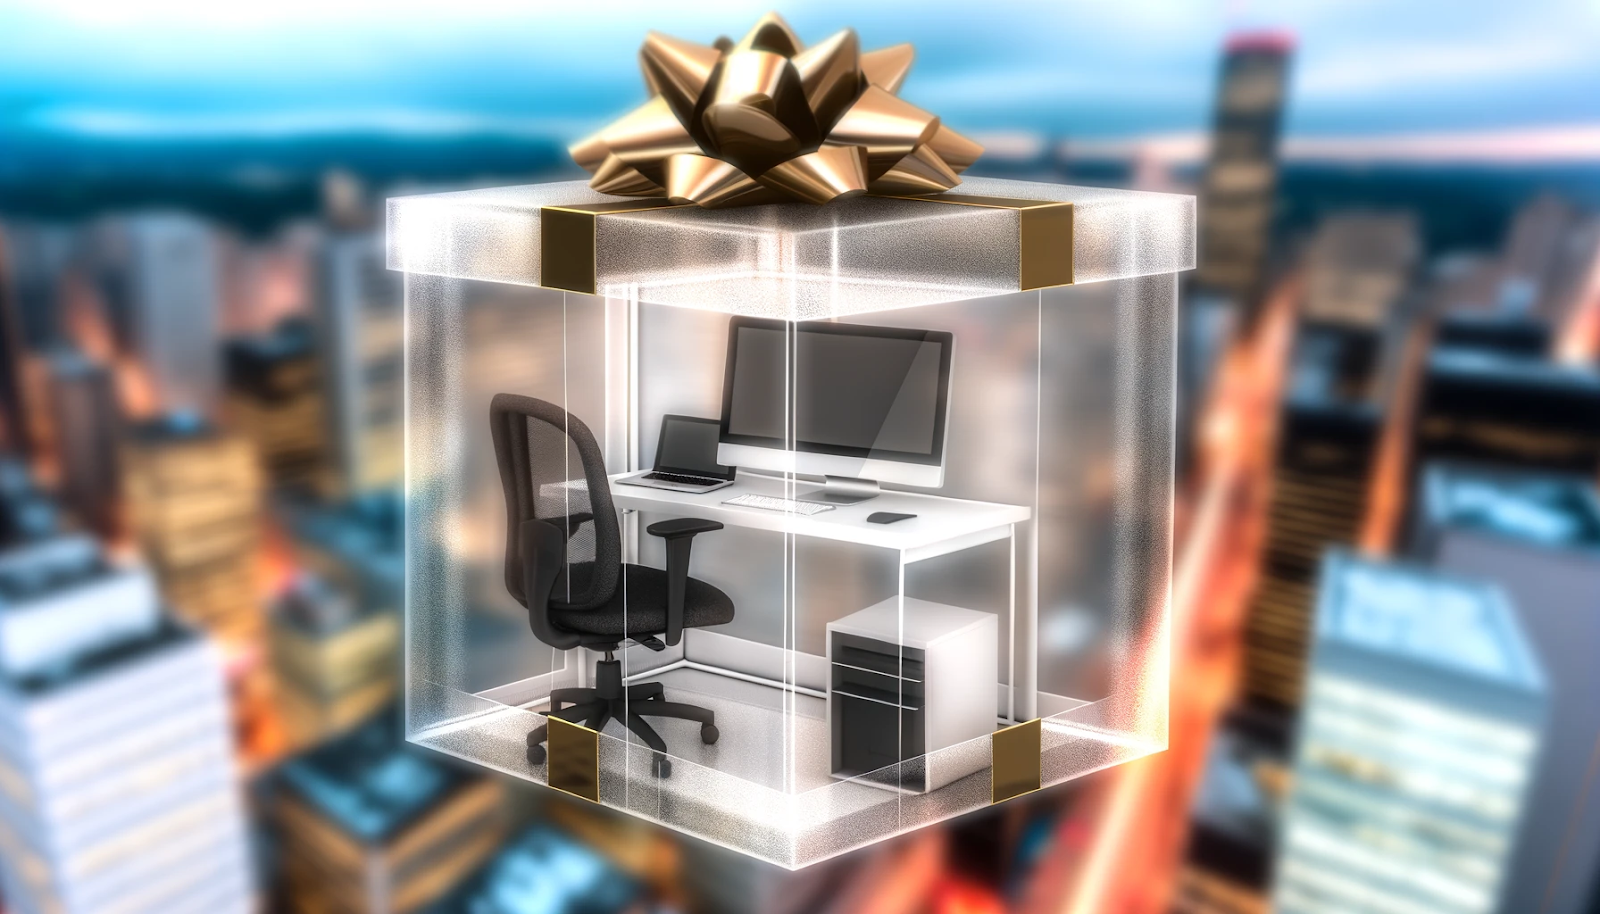 Your ideal office as a gift